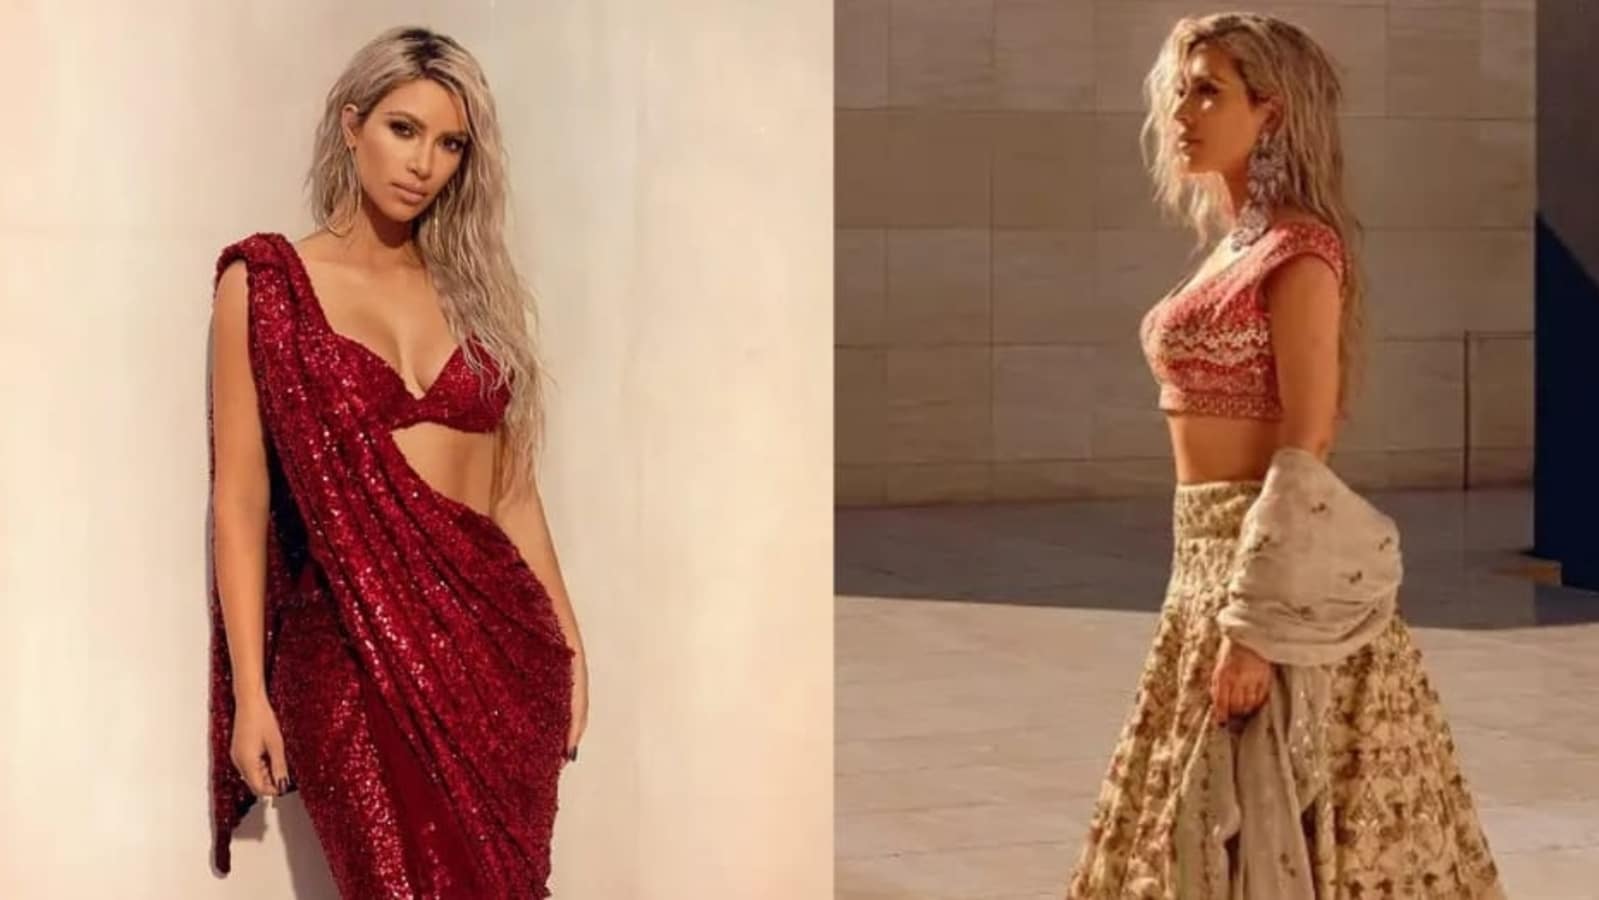 When Kim Kardashian decked up in desi outfits for photoshoot: ‘The sarees, jewellery were so beautiful’